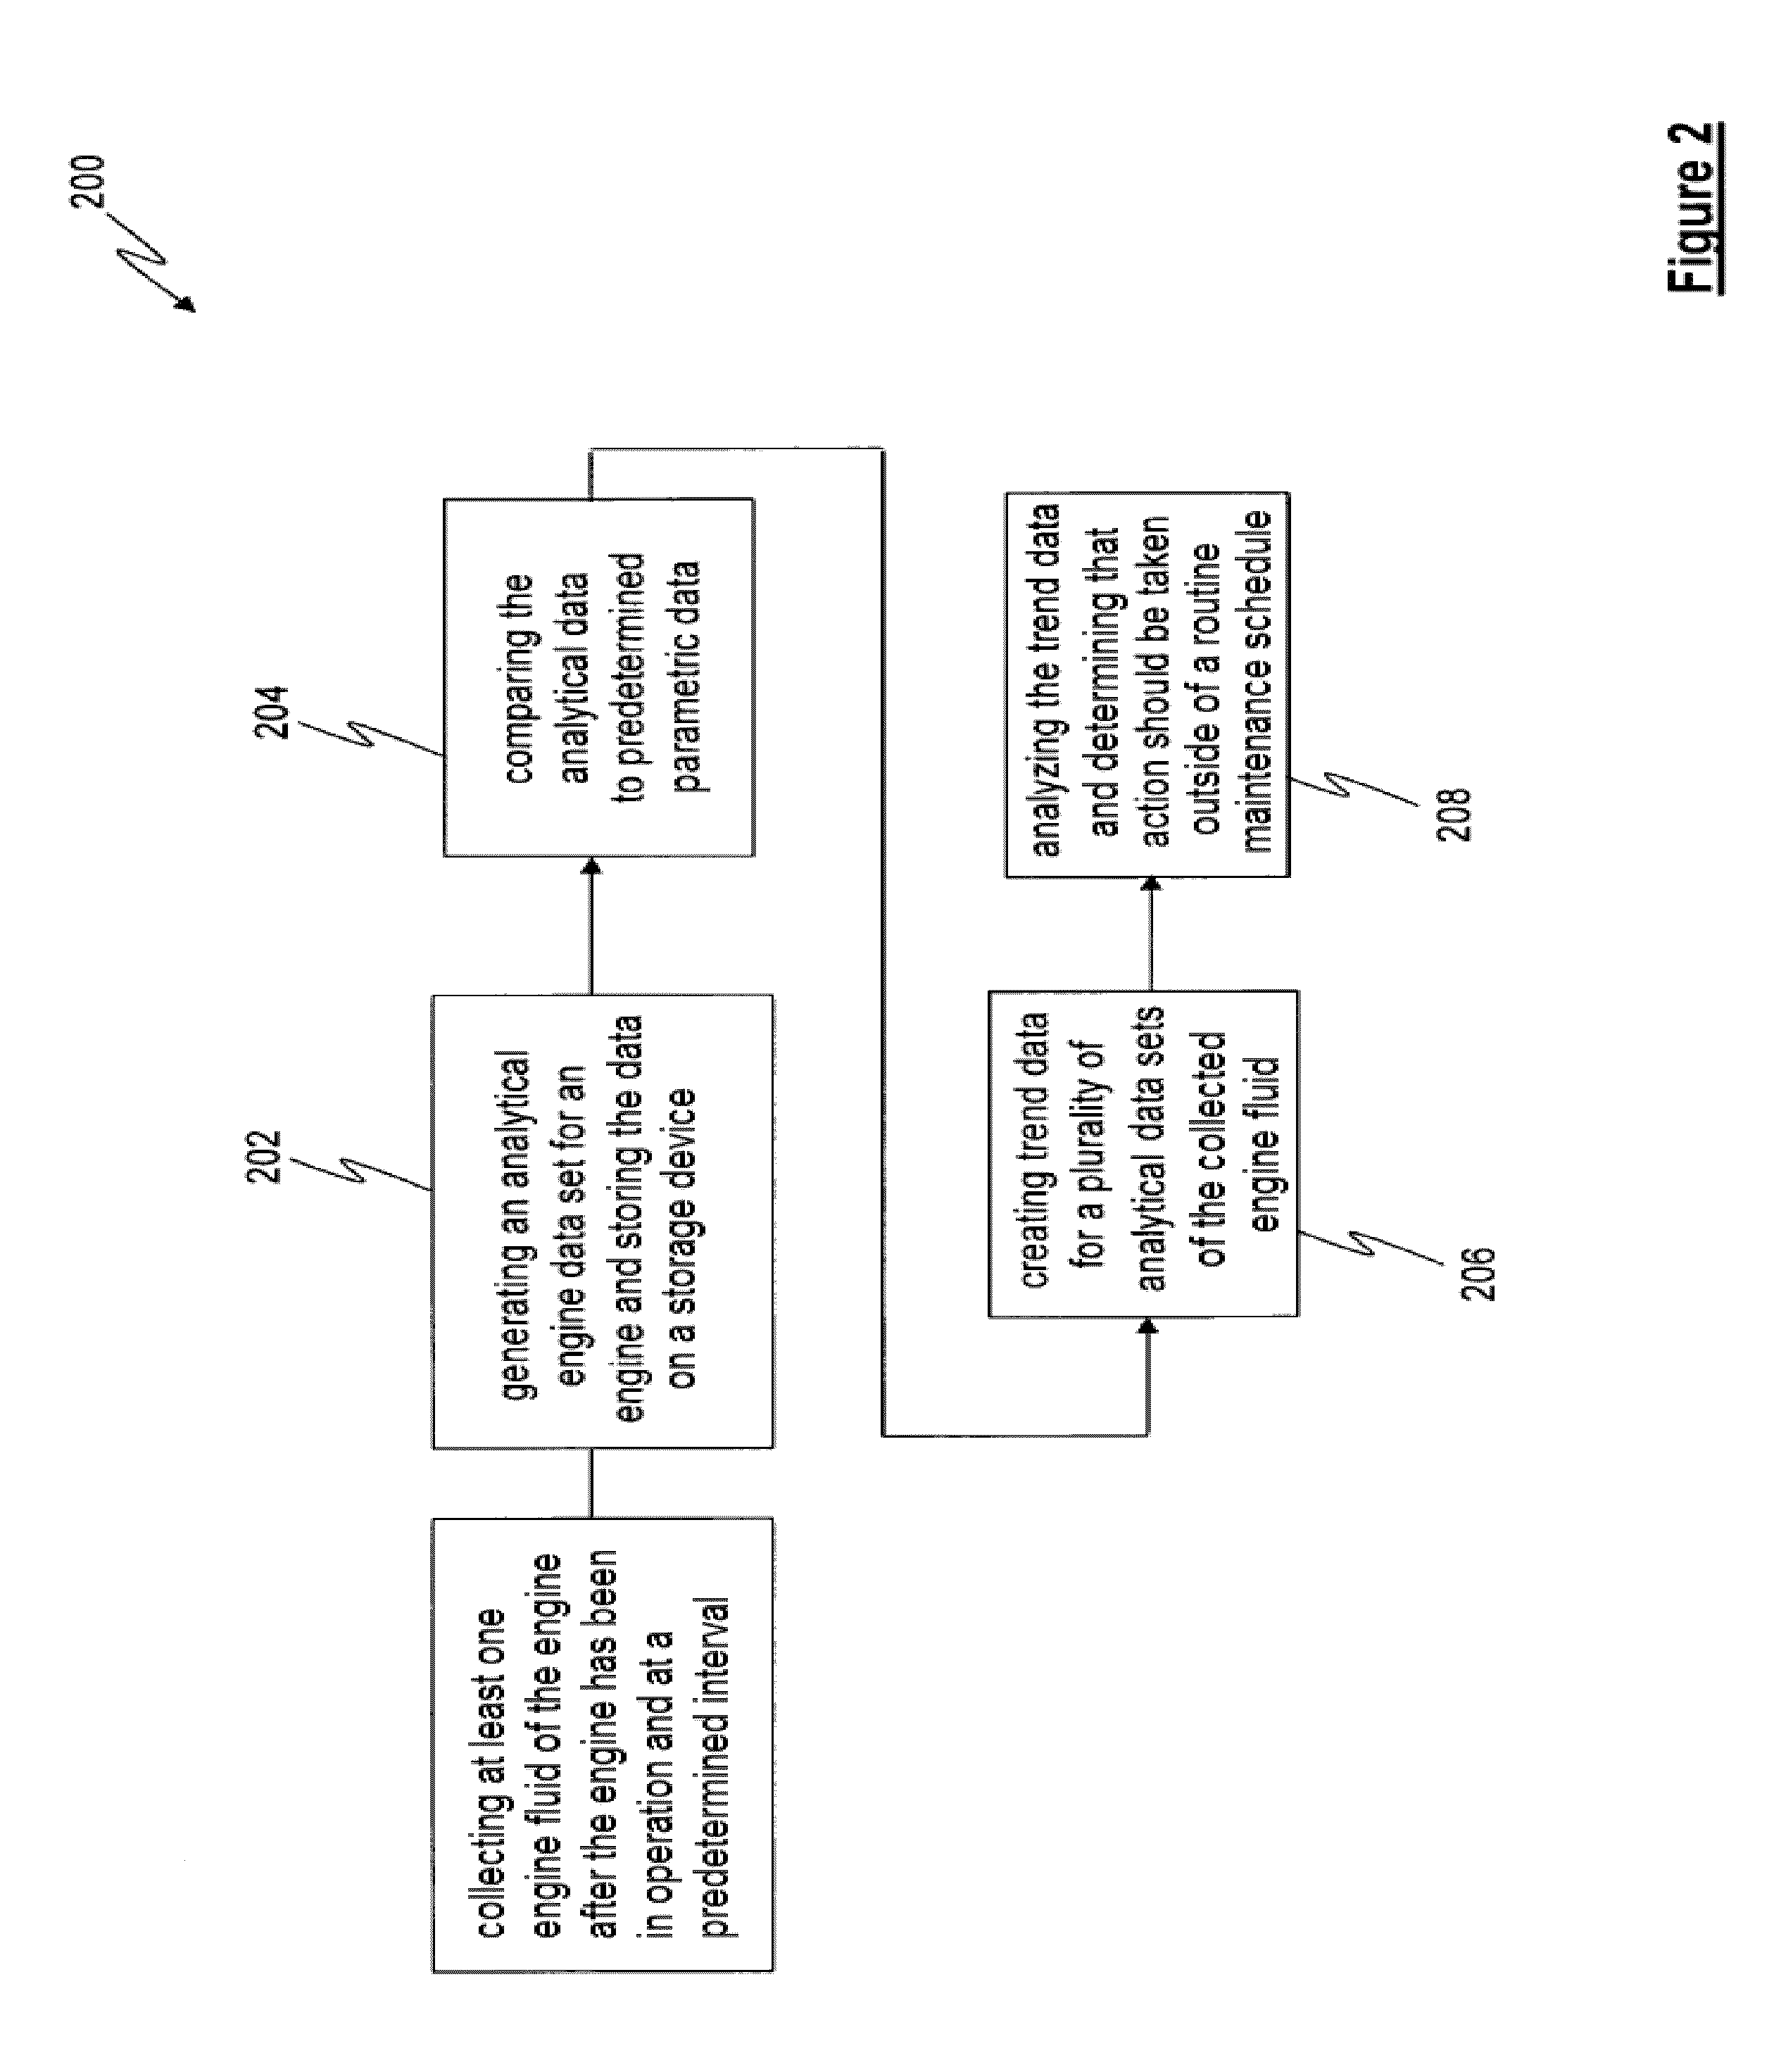 Method for servicing a vehicle